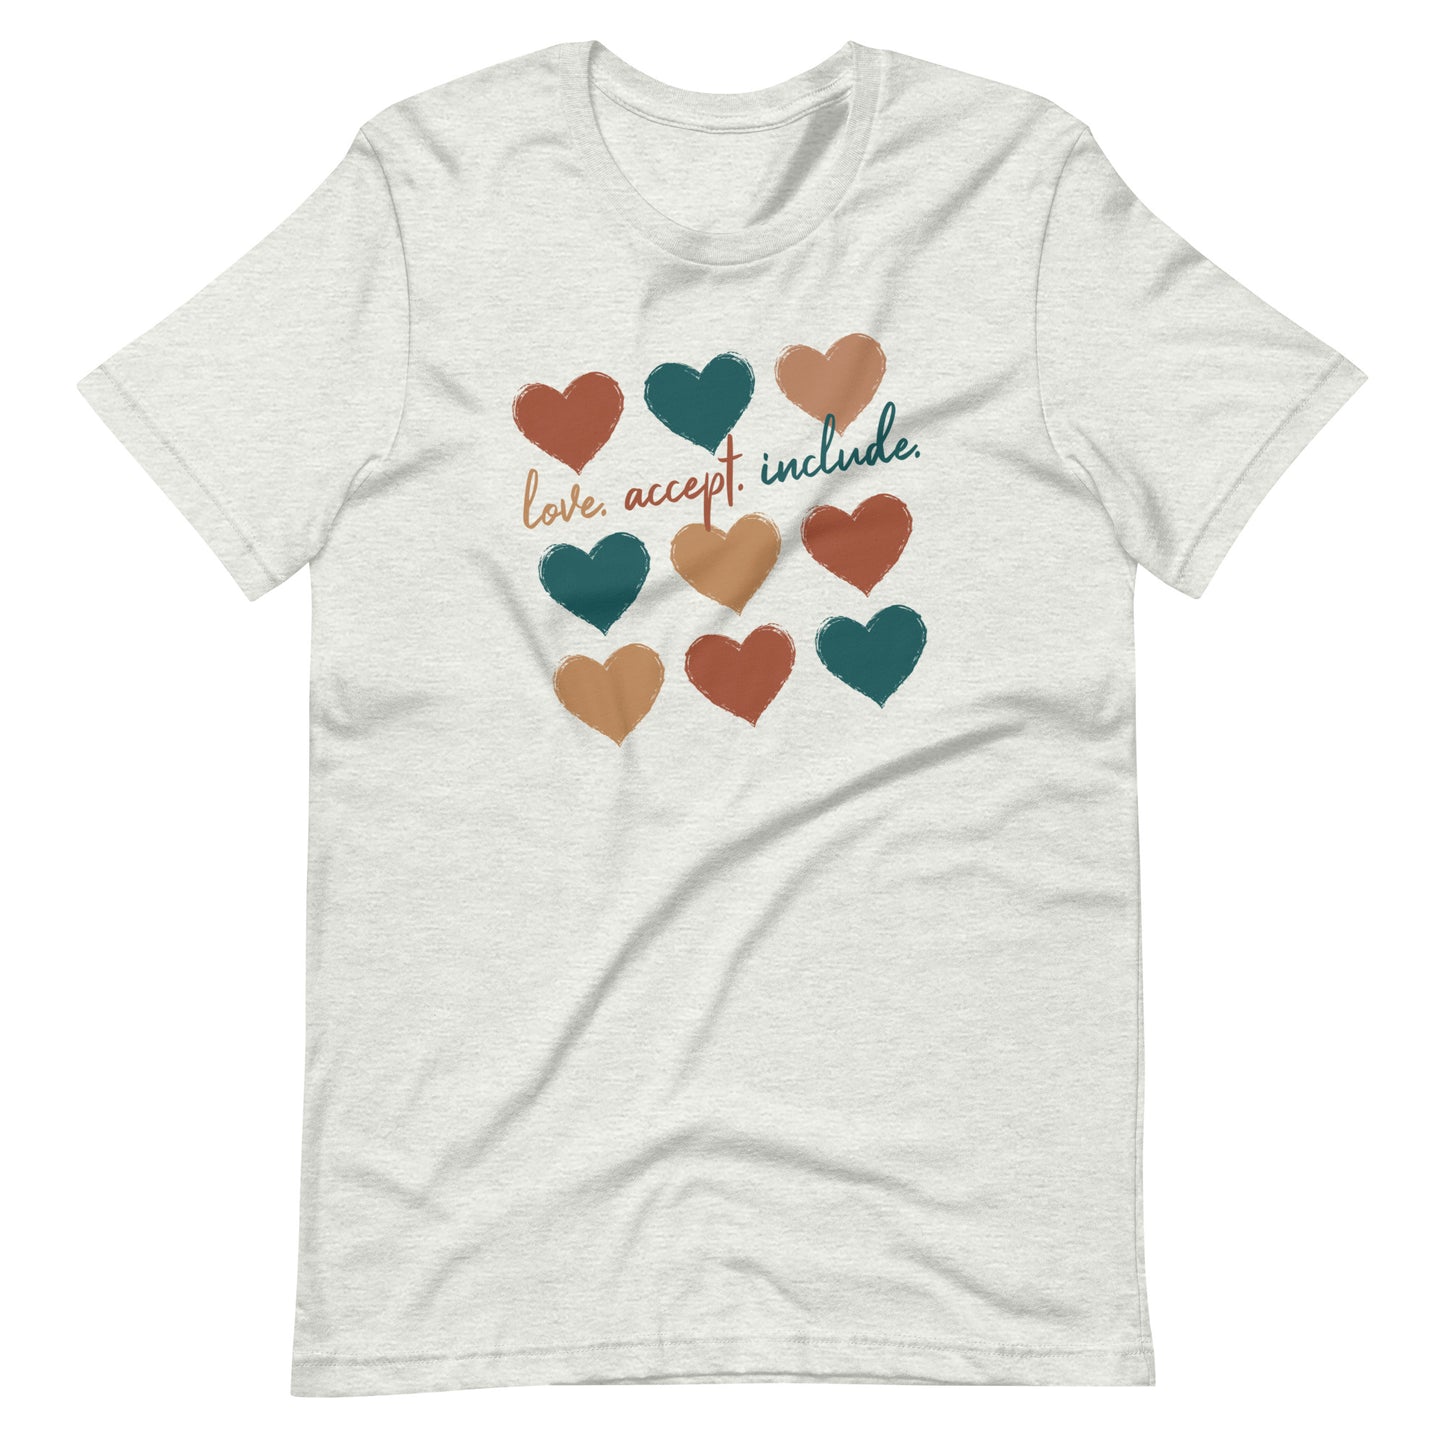 Love. Accept. Include | Adult Unisex Tee